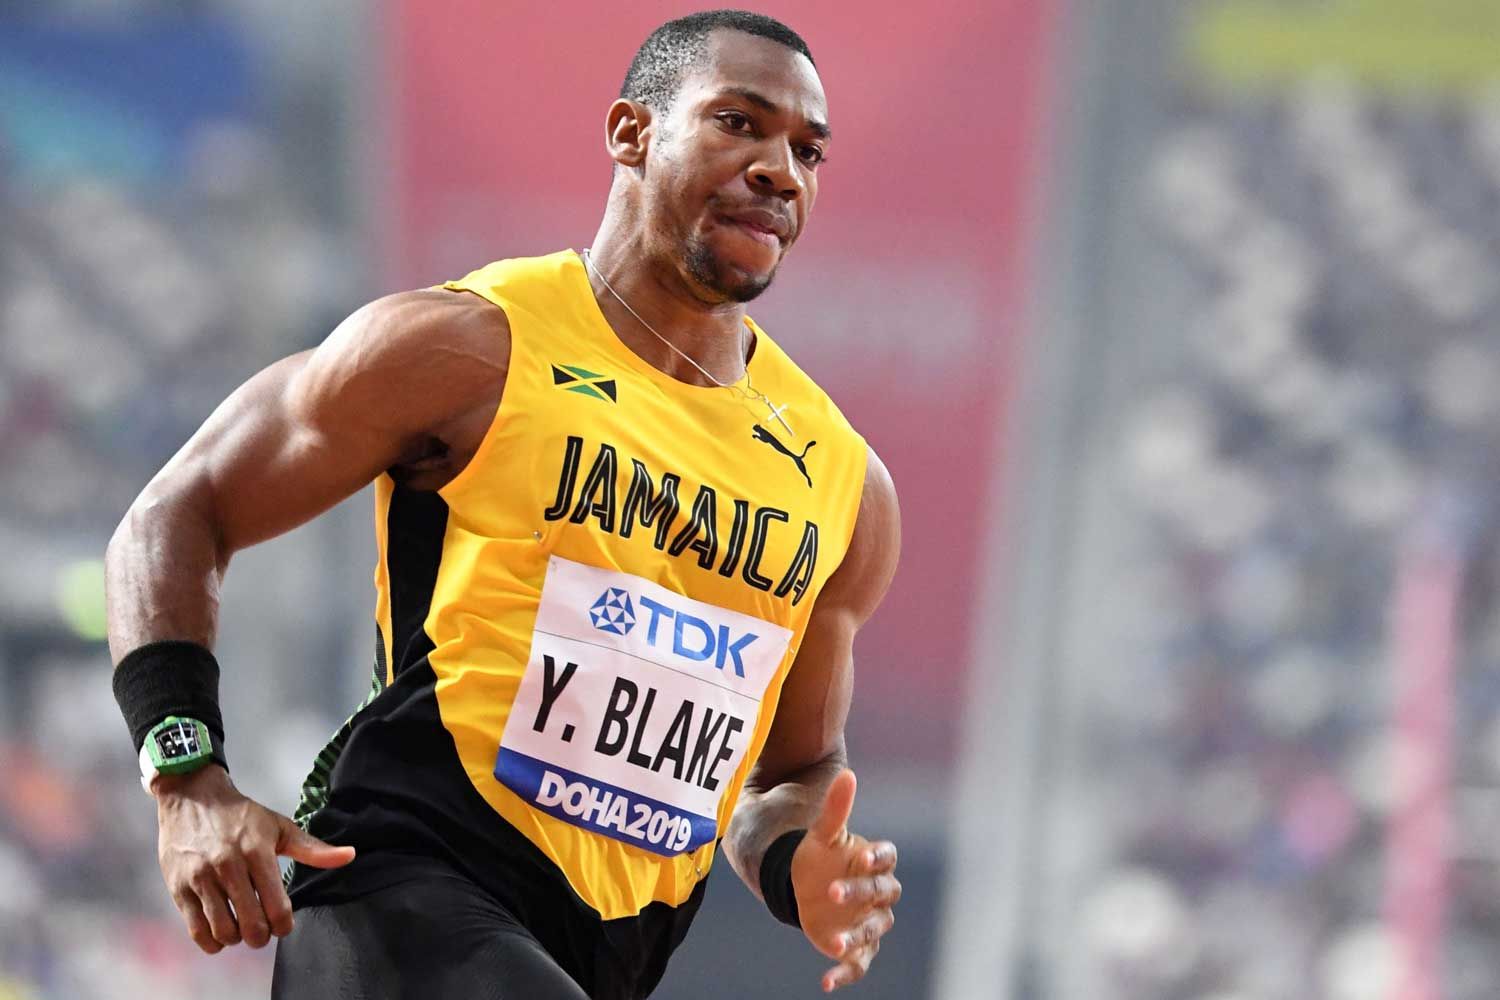 Jamaica's Yohan Blake competes in the Men's 100m heats at the 2019 IAAF World Athletics Championships at the Khalifa International stadium in Doha on September 27, 2019. (Photo by Jewel SAMAD / AFP) (Photo credit should read JEWEL SAMAD/AFP via Getty Images)